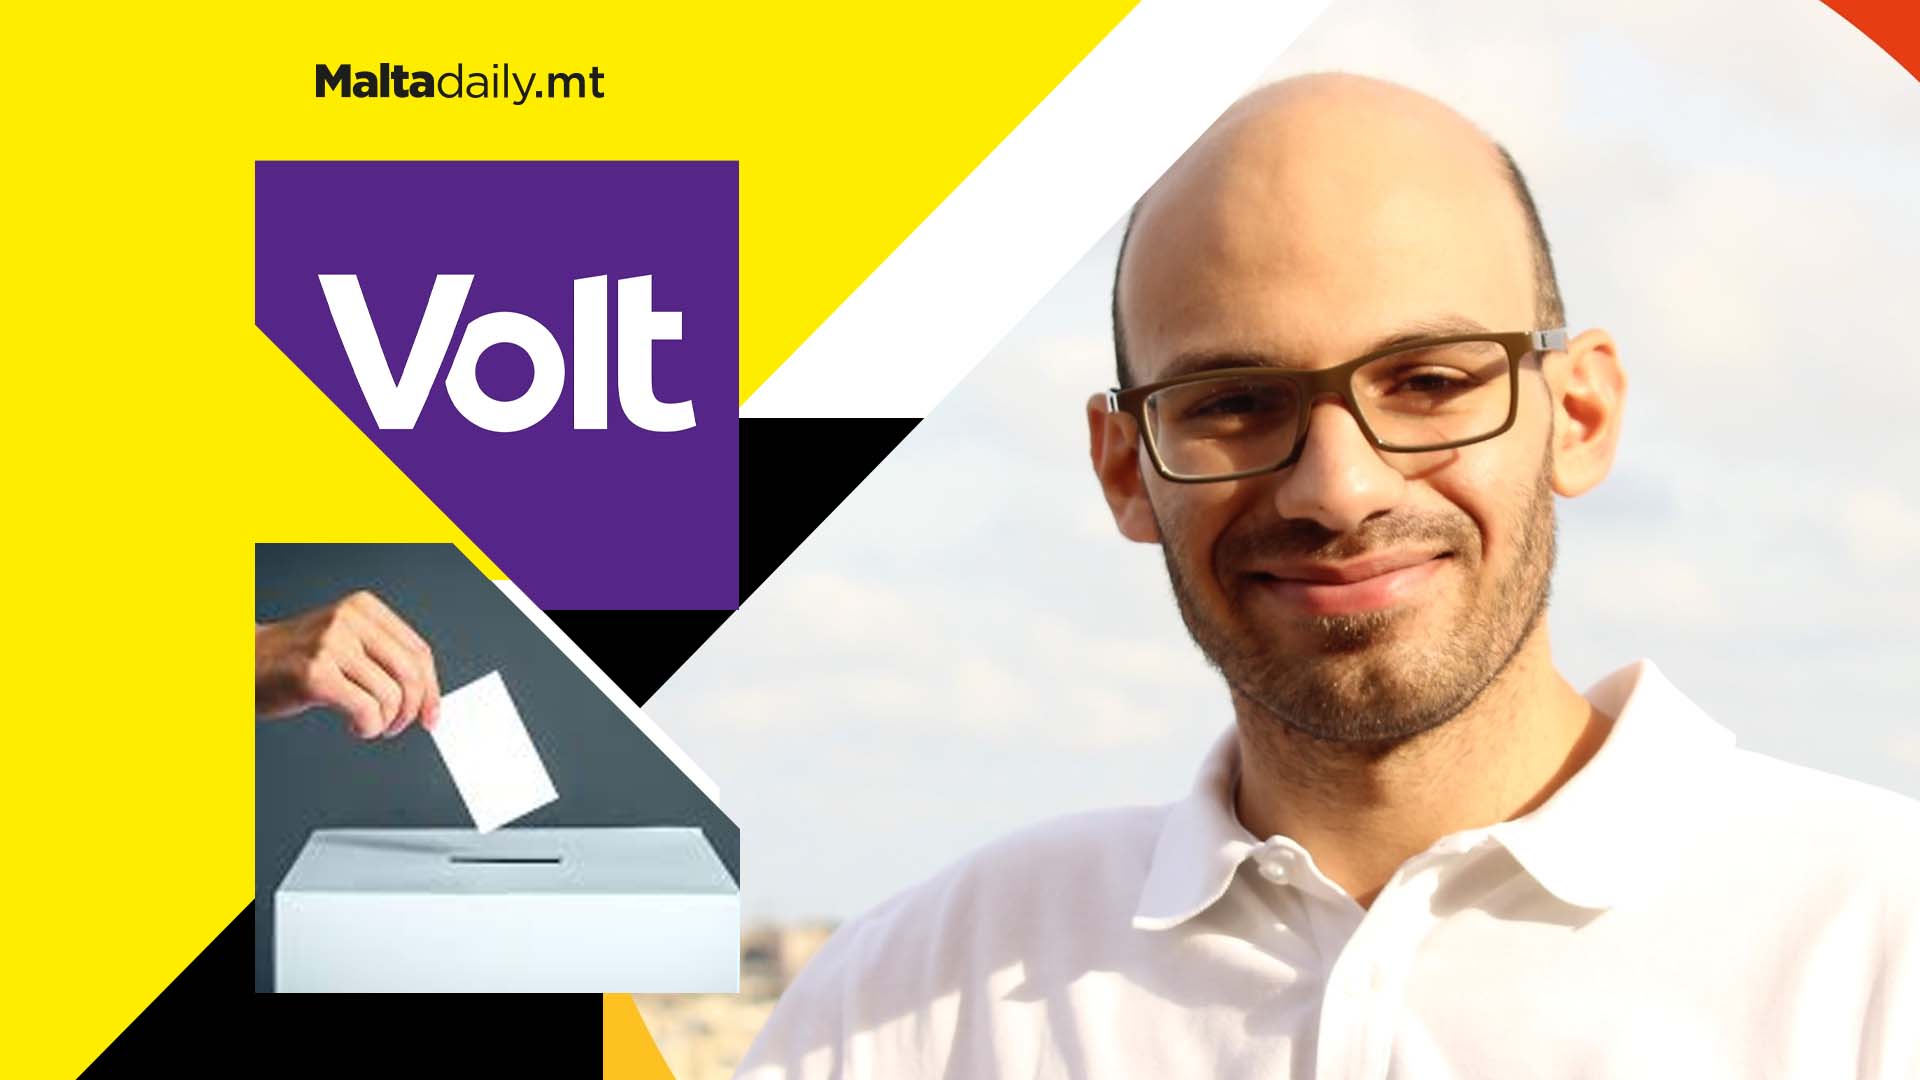 Thomas ‘Kass’ Mallia will be Volt’s single candidate for election